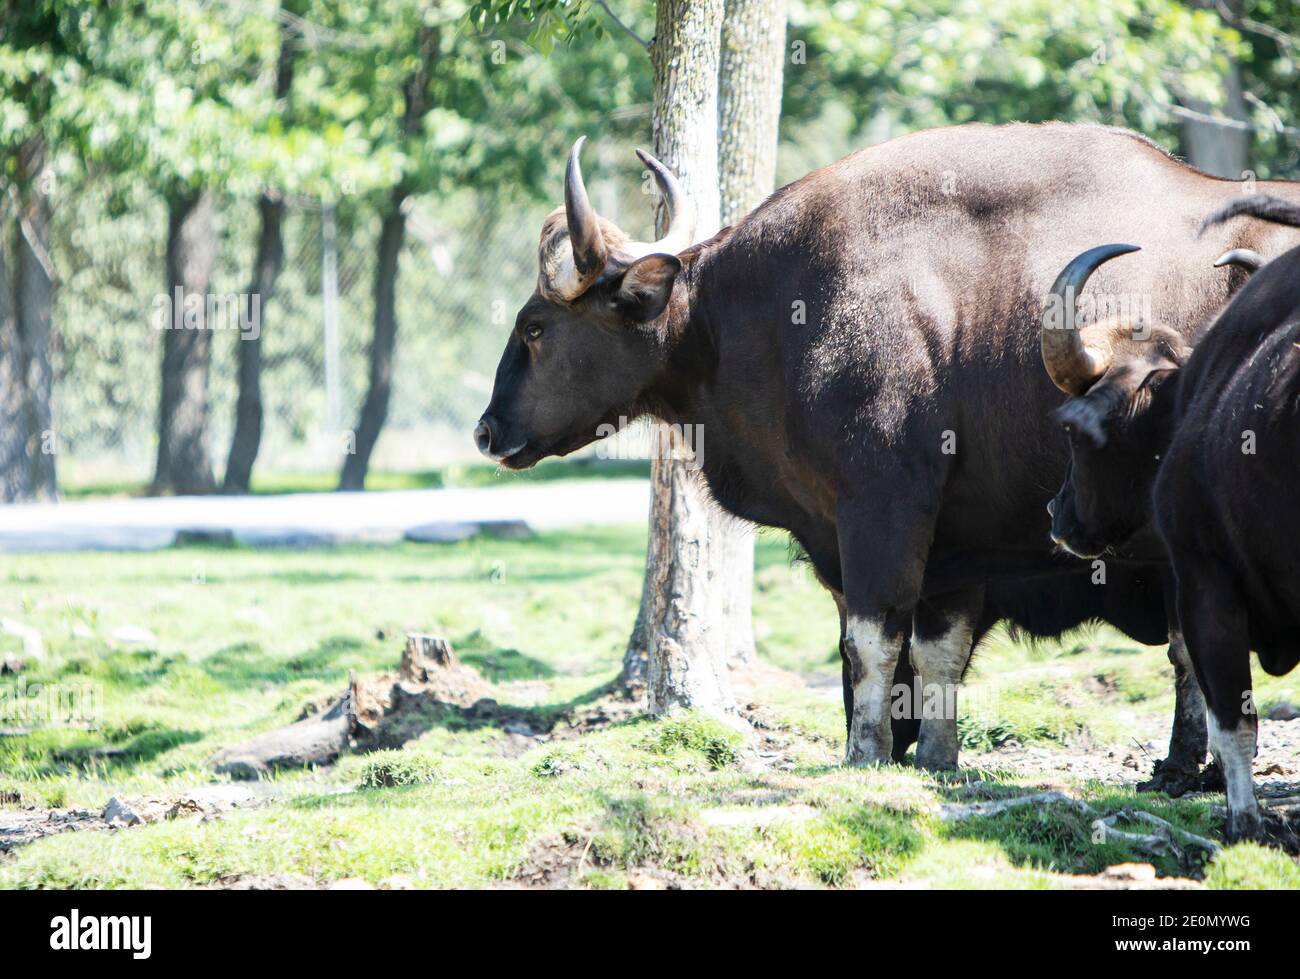 Big gaur in beautiful landscape. Hairy cow wild animal in nature. The Year  of the Ox, cattle or water buffalo in 2021. Gaur family in America or Canad  Stock Photo - Alamy